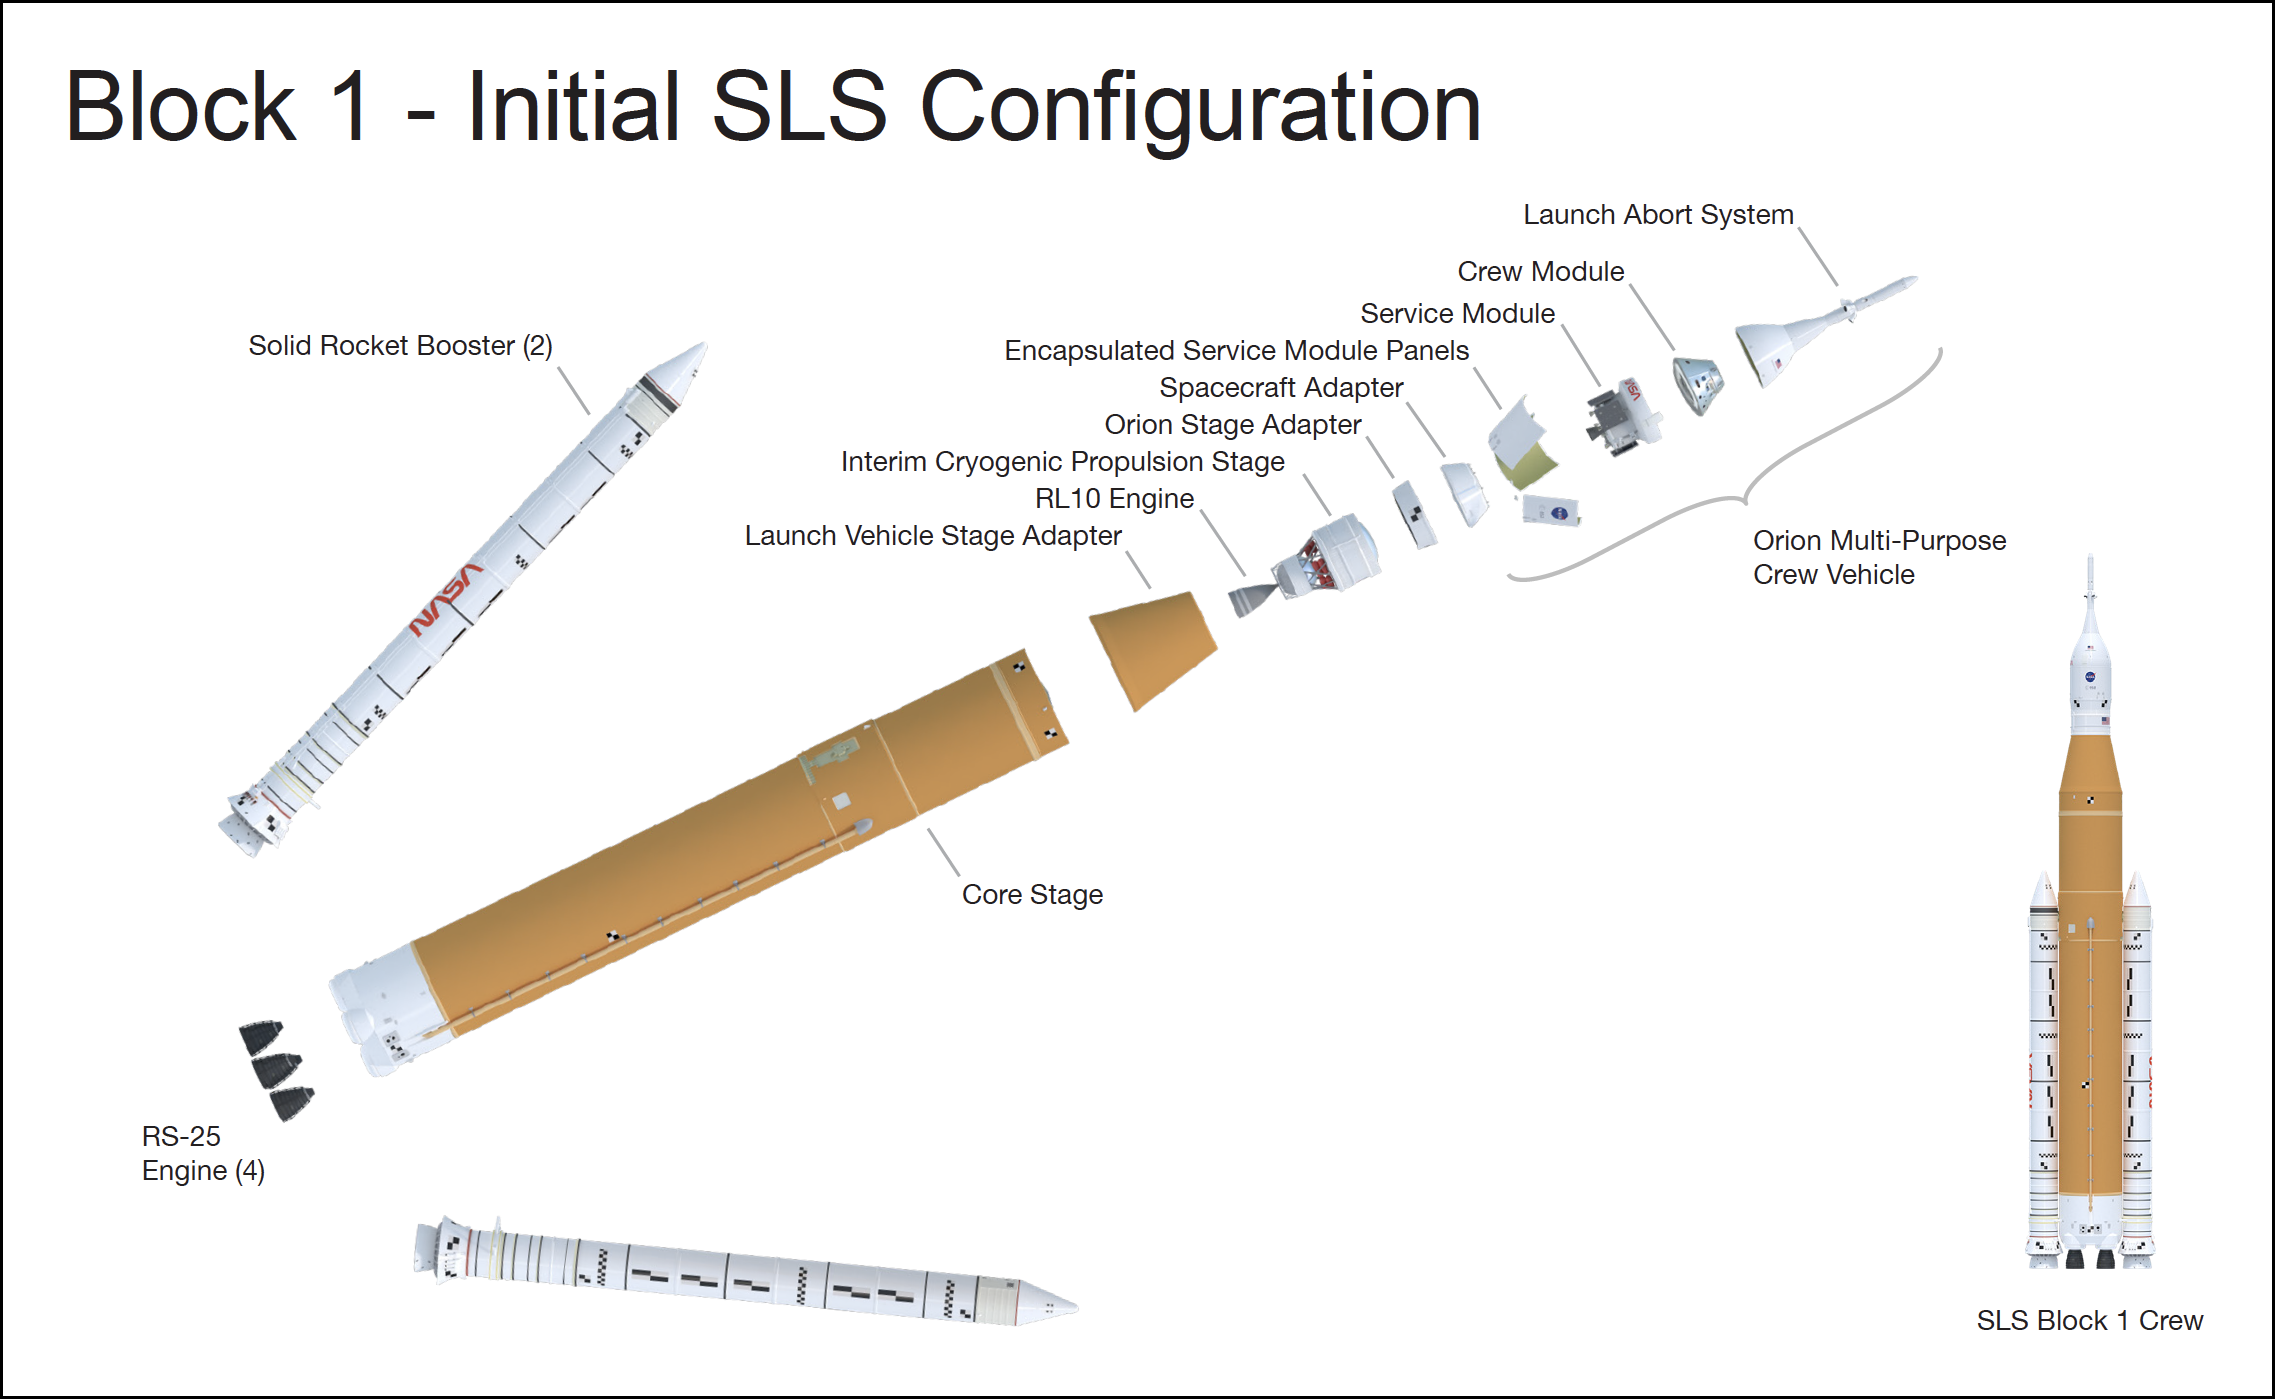 A diagram shows the initial Block 1 configuration for SLS.